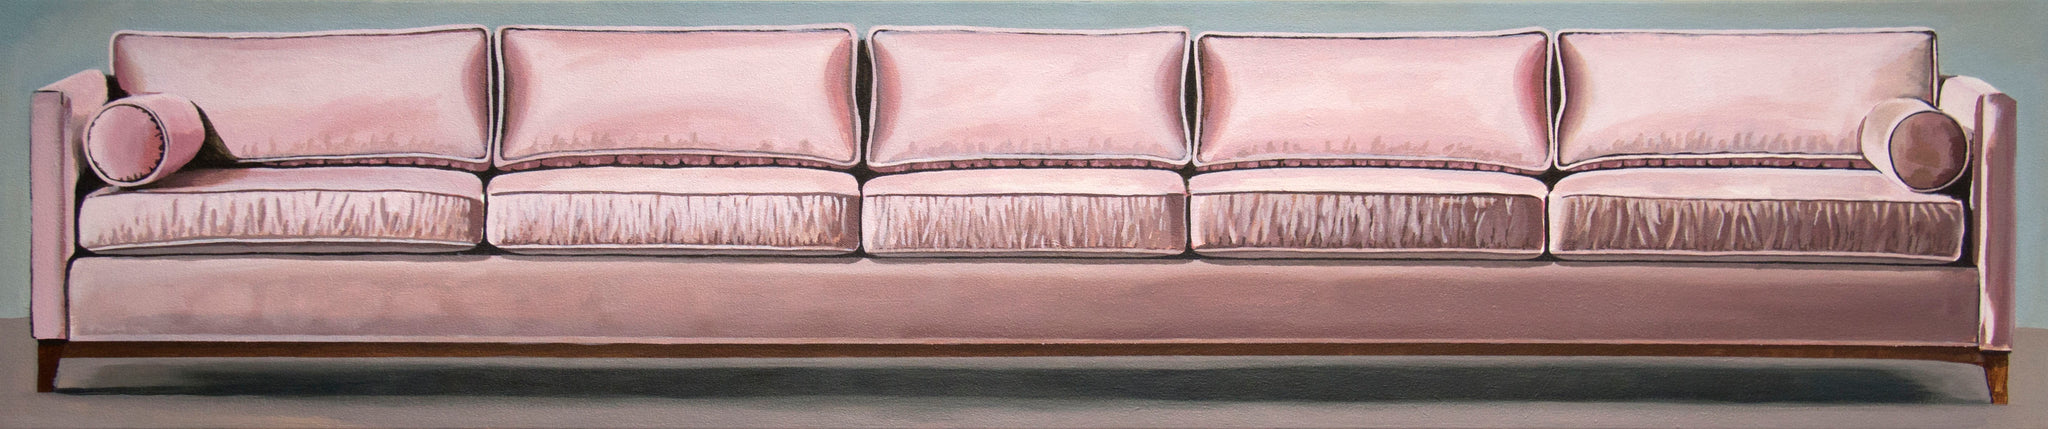 Iva Kinnaird, "Pink Couch" SOLD